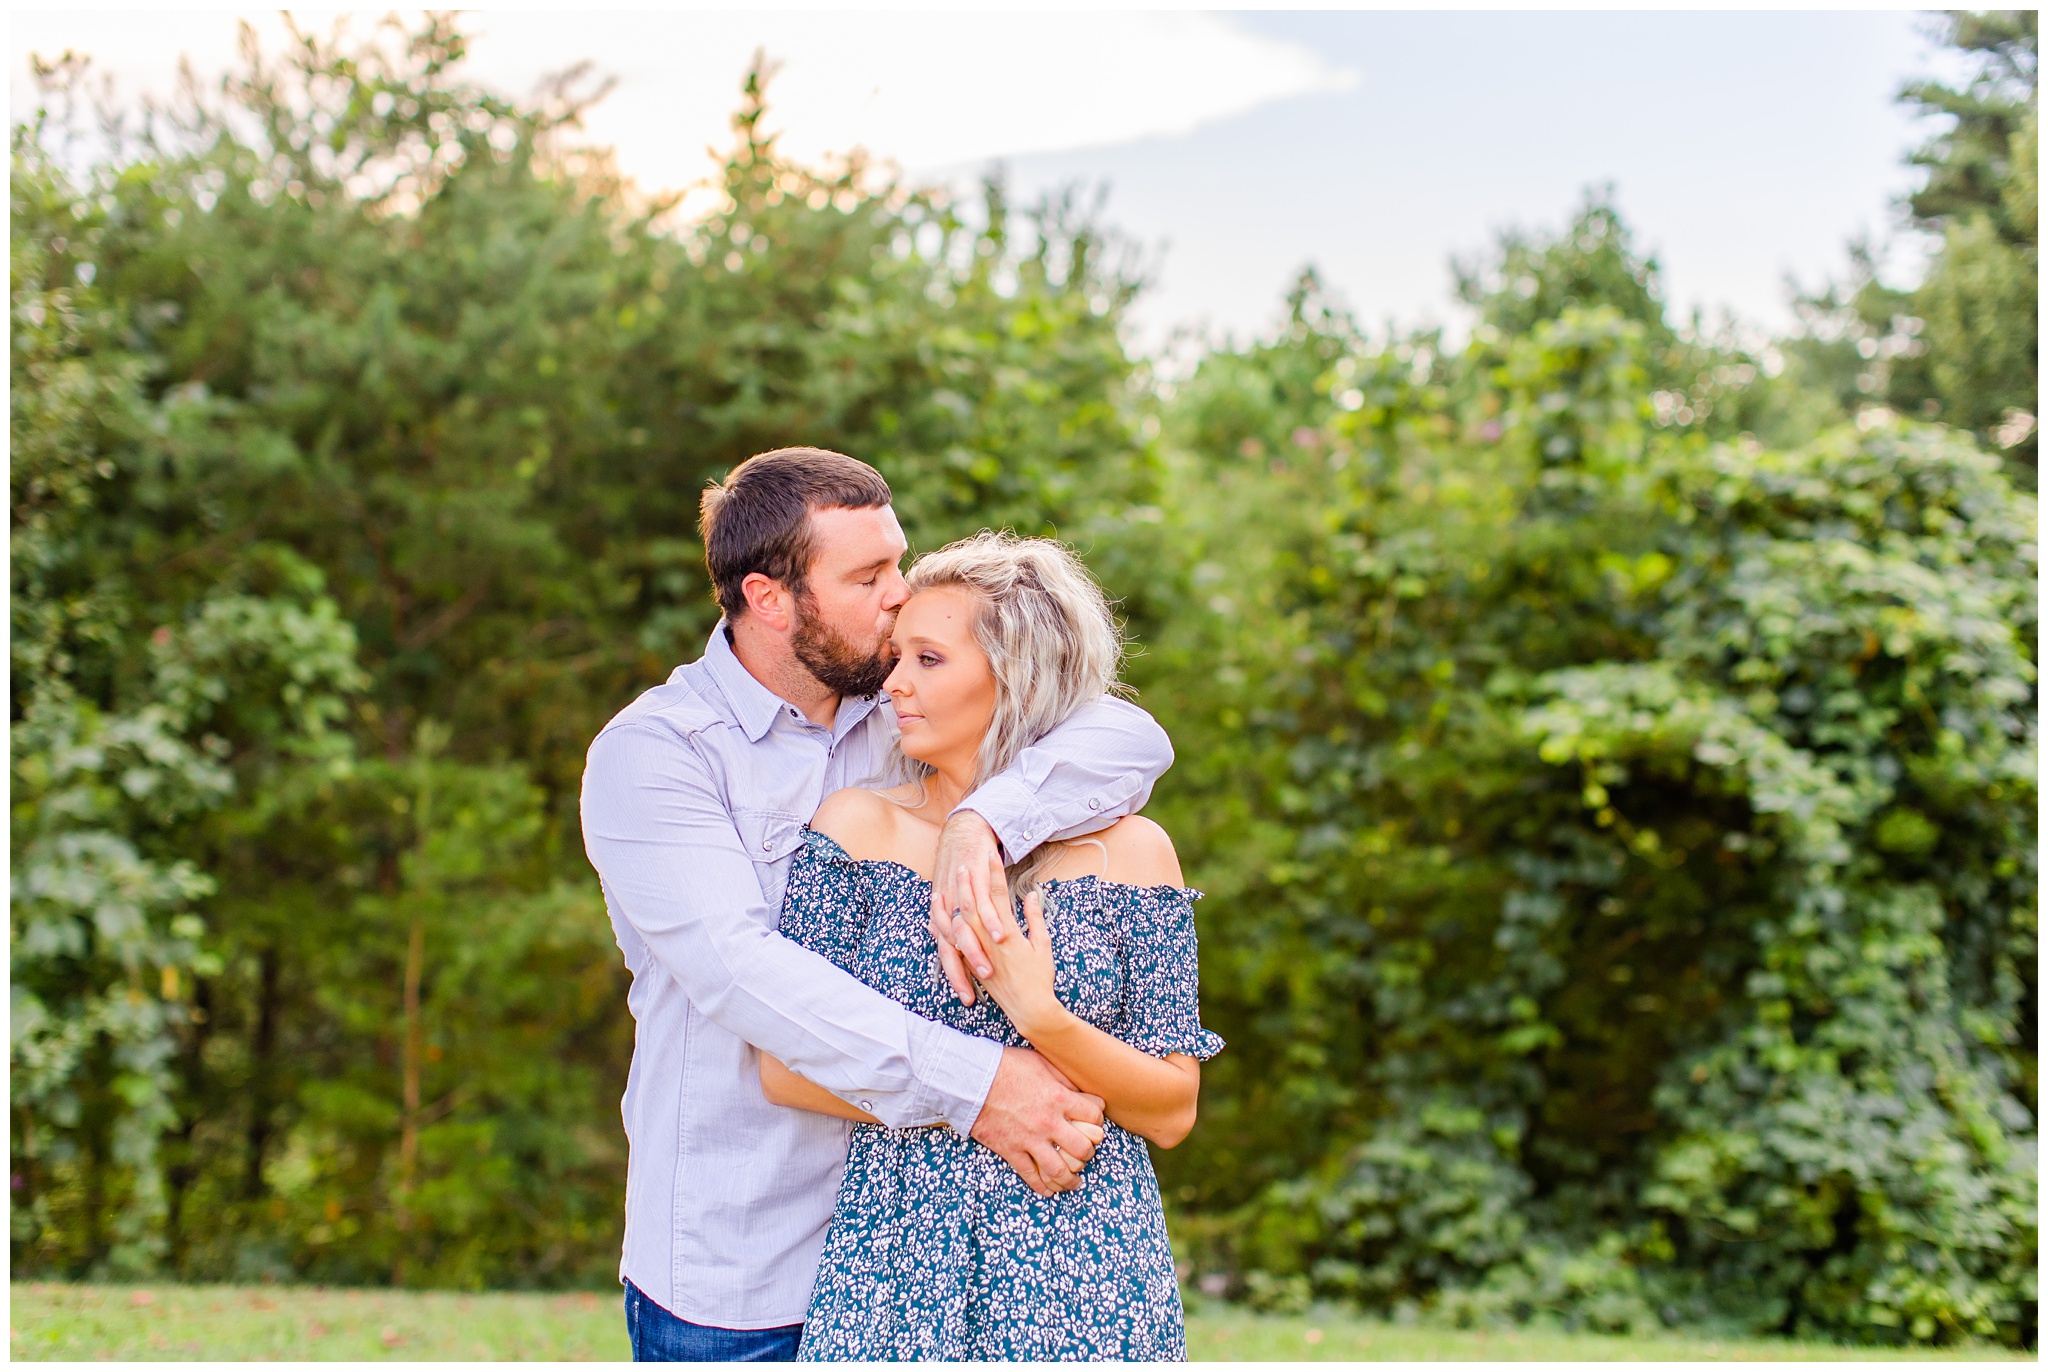 couple poses outdoors at a park for their anniversary session